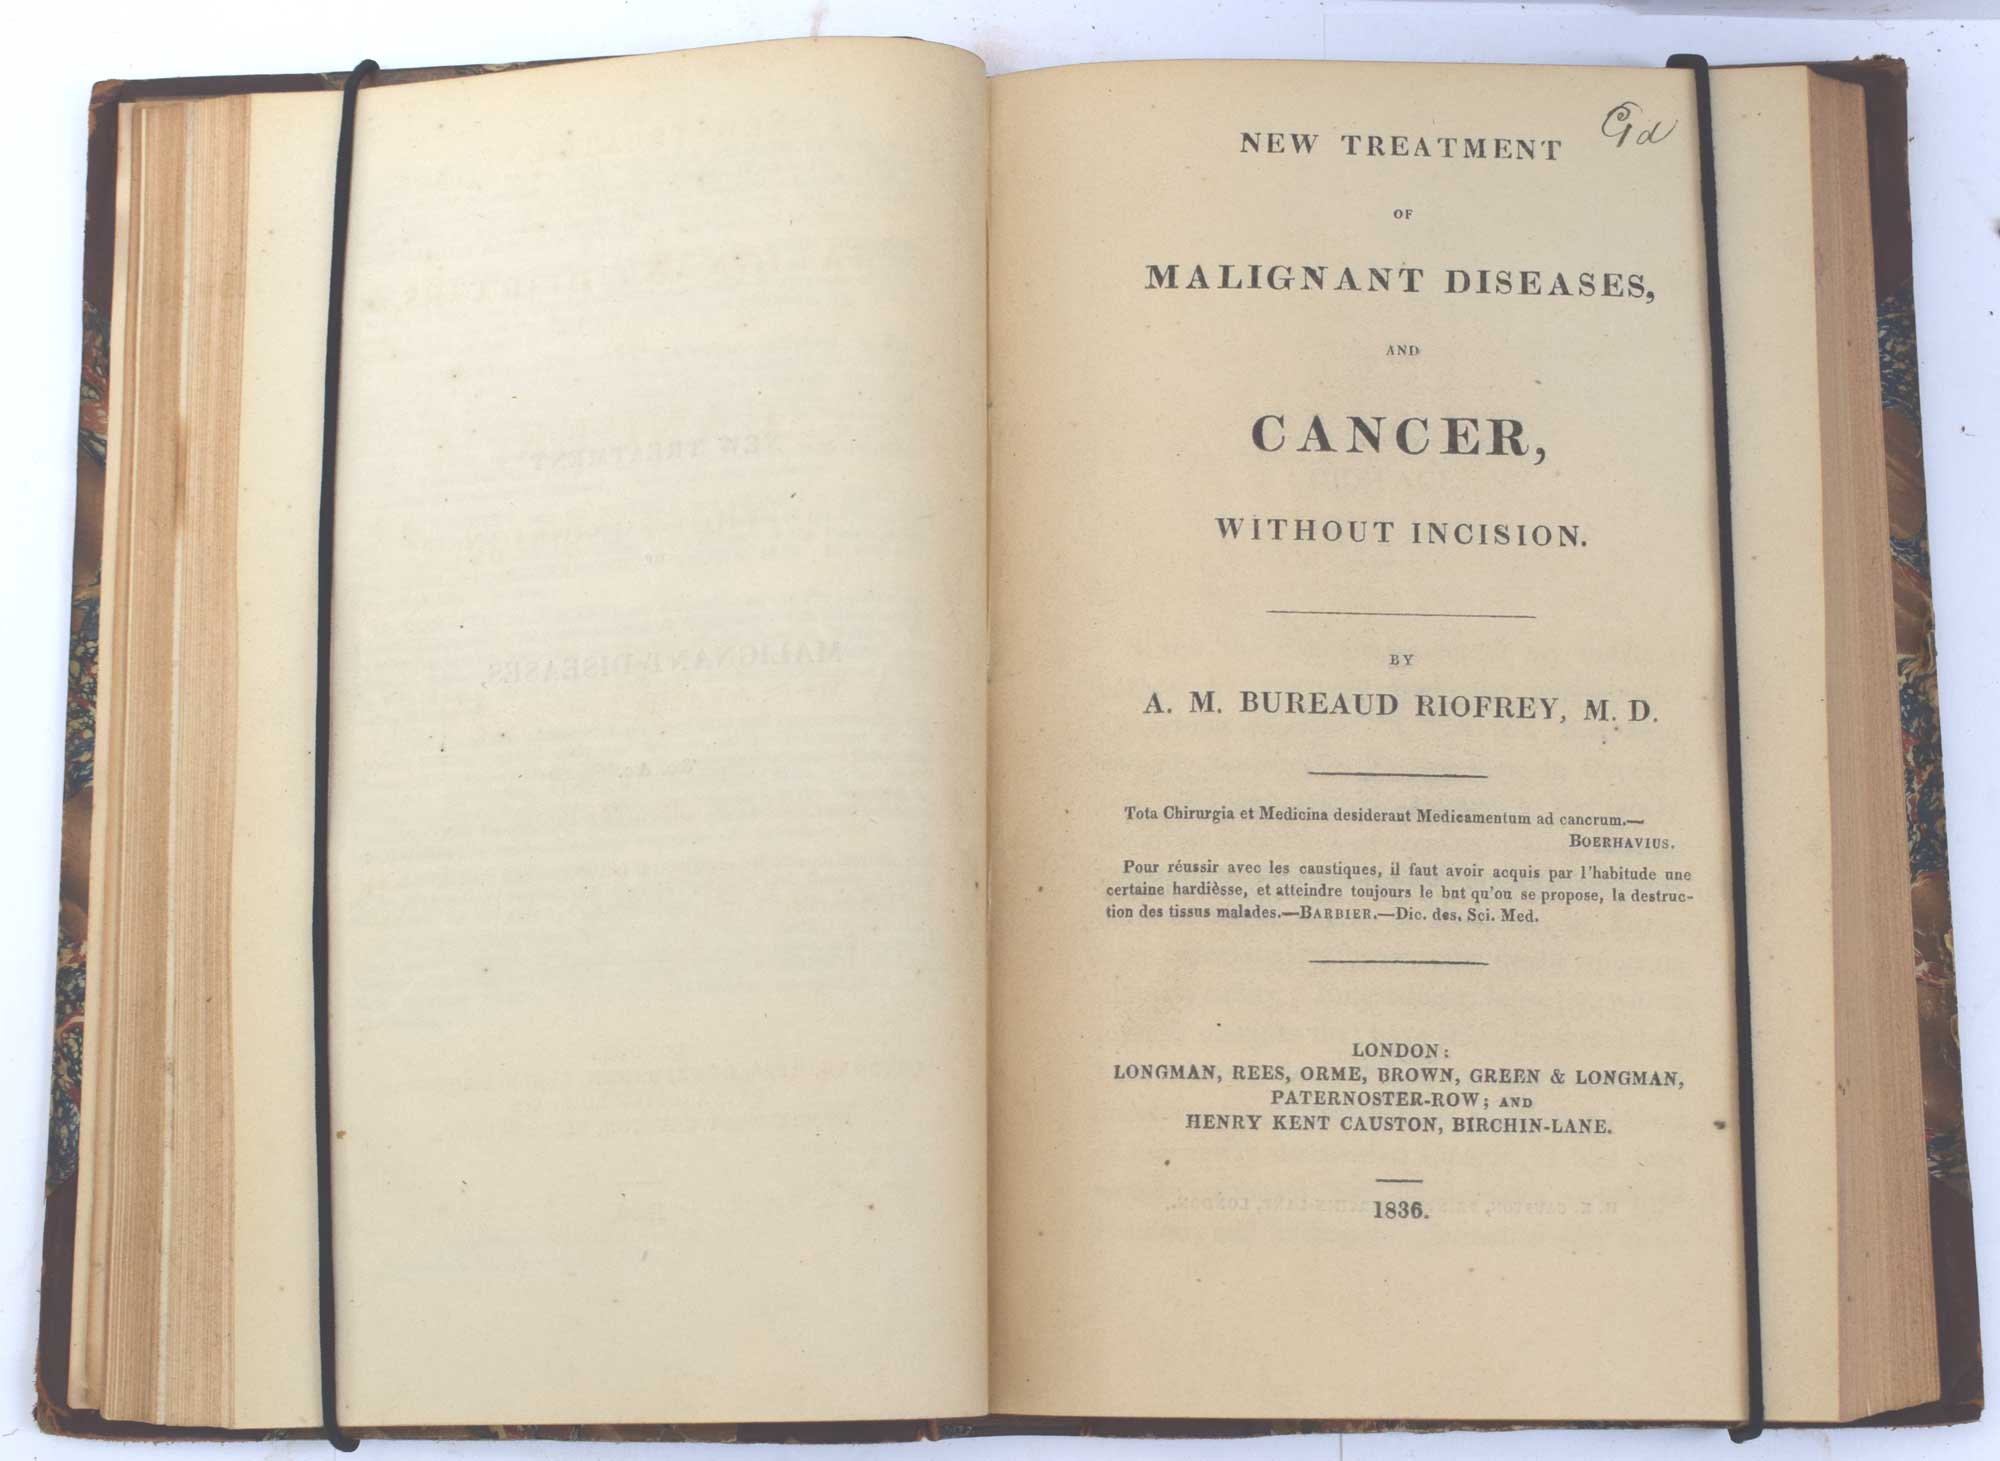 ..Whereby Cancerous Ulceration May be Stopped. [1]. On Scirrhus and Cancer [II]. New Treatment of Malignant Diseases and Cancer, Without Incision [III]. A Practical Essay on Cancer [IV]. Cases of Cancer and Cancerous Tendency [V]. 5 works in one volume.